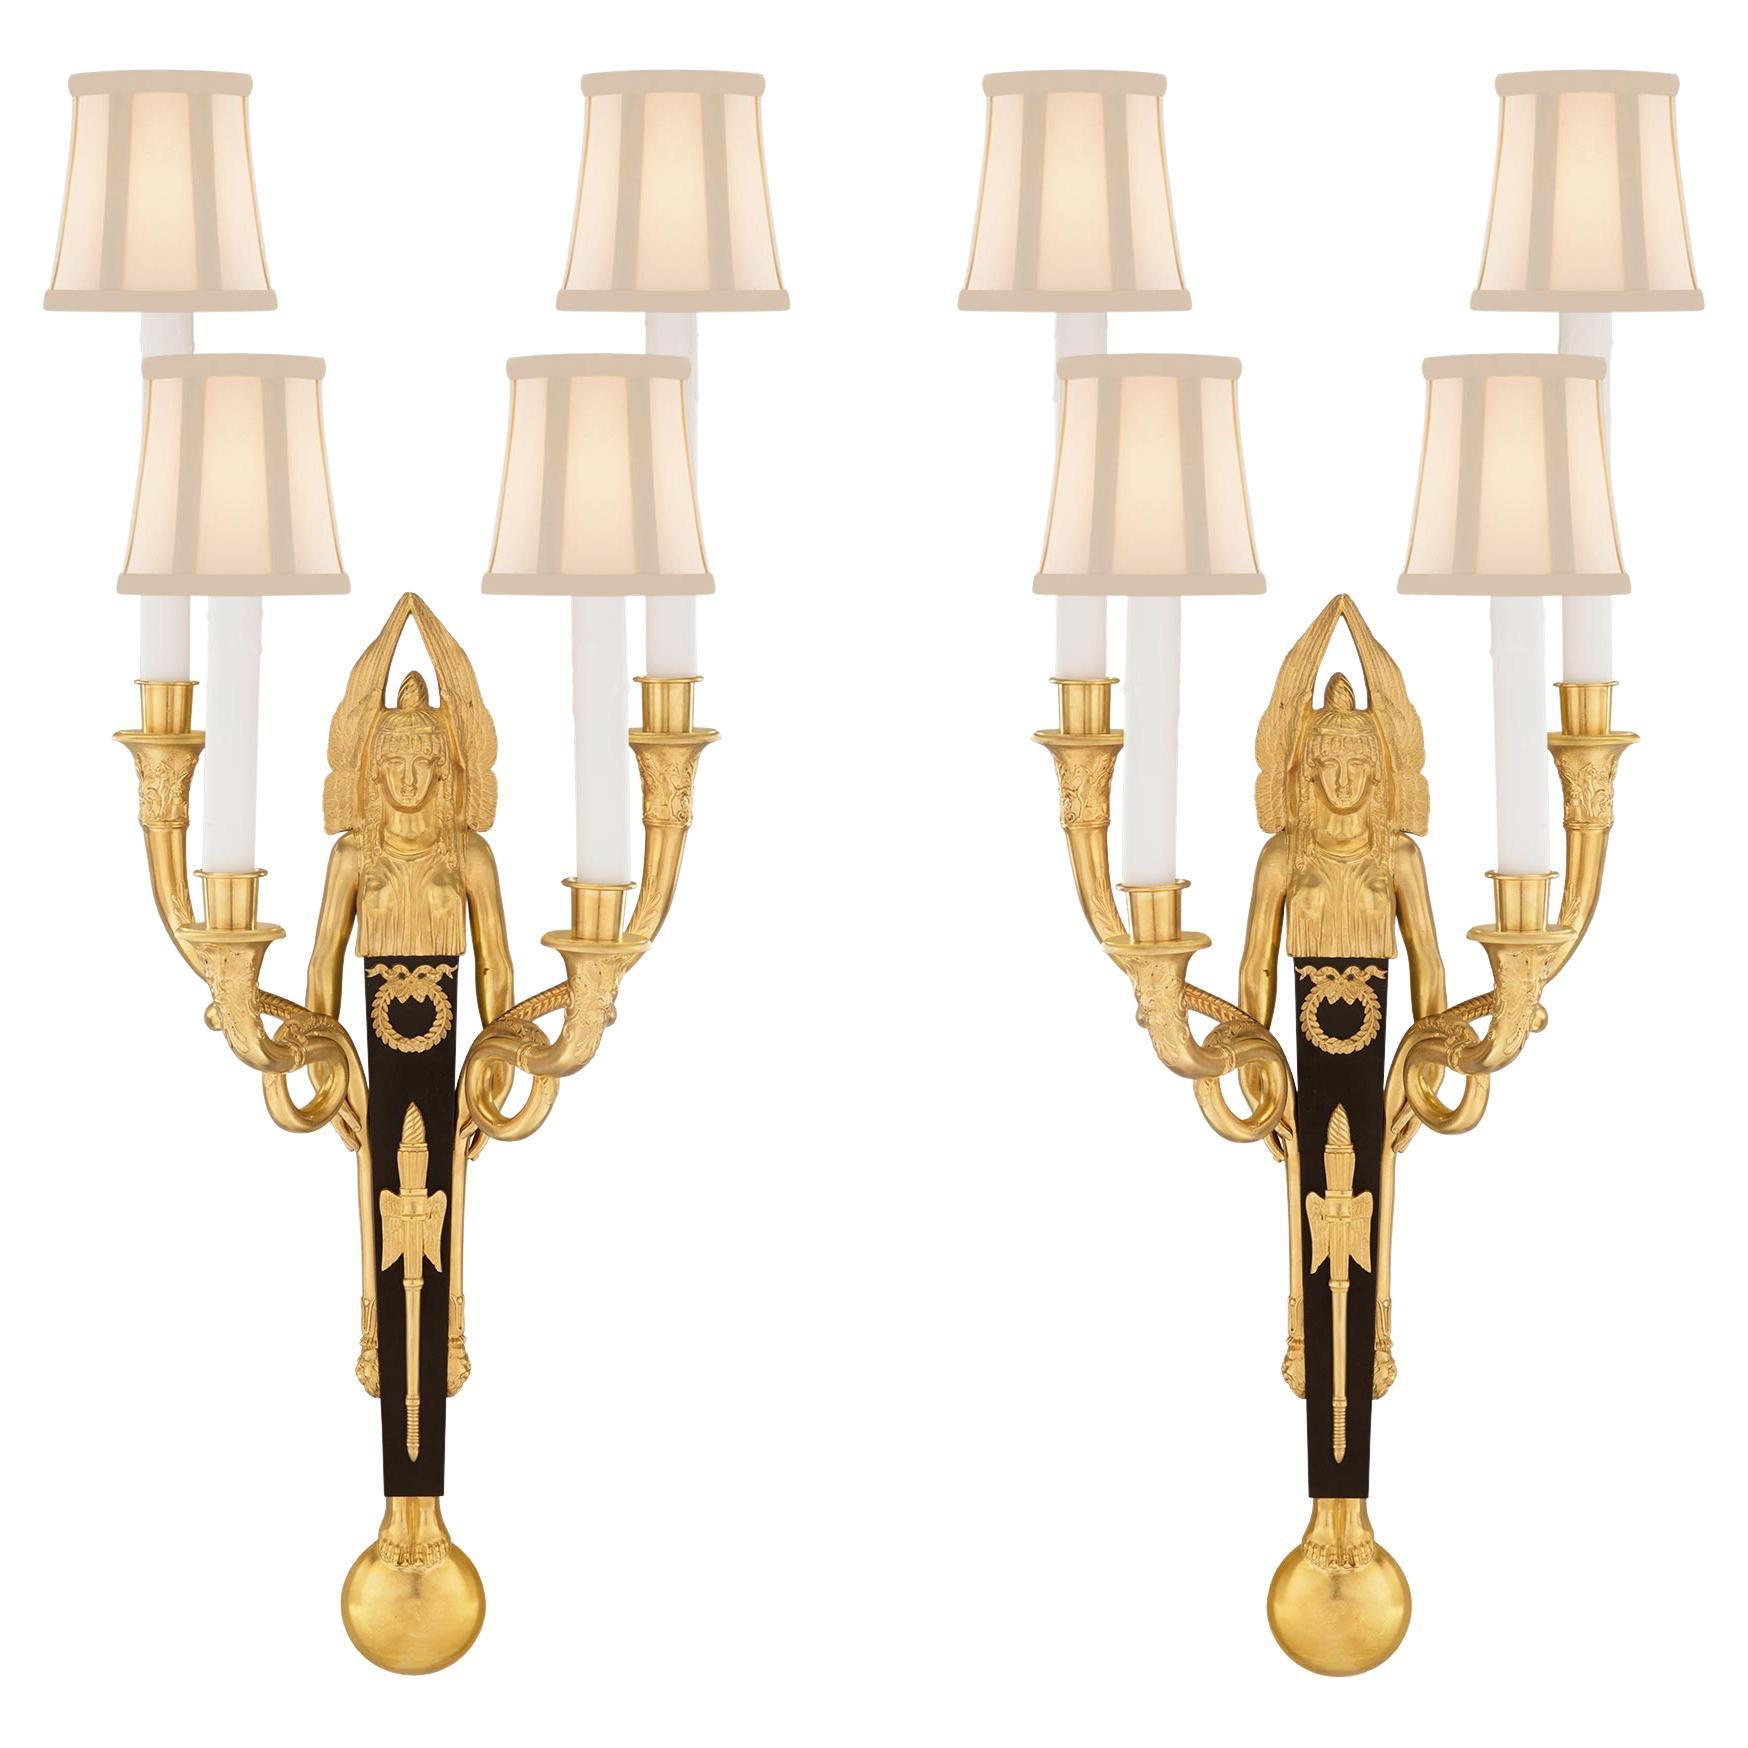 Pair of French 19th Century Neoclassical St. Bronze and Ormolu Sconces For Sale